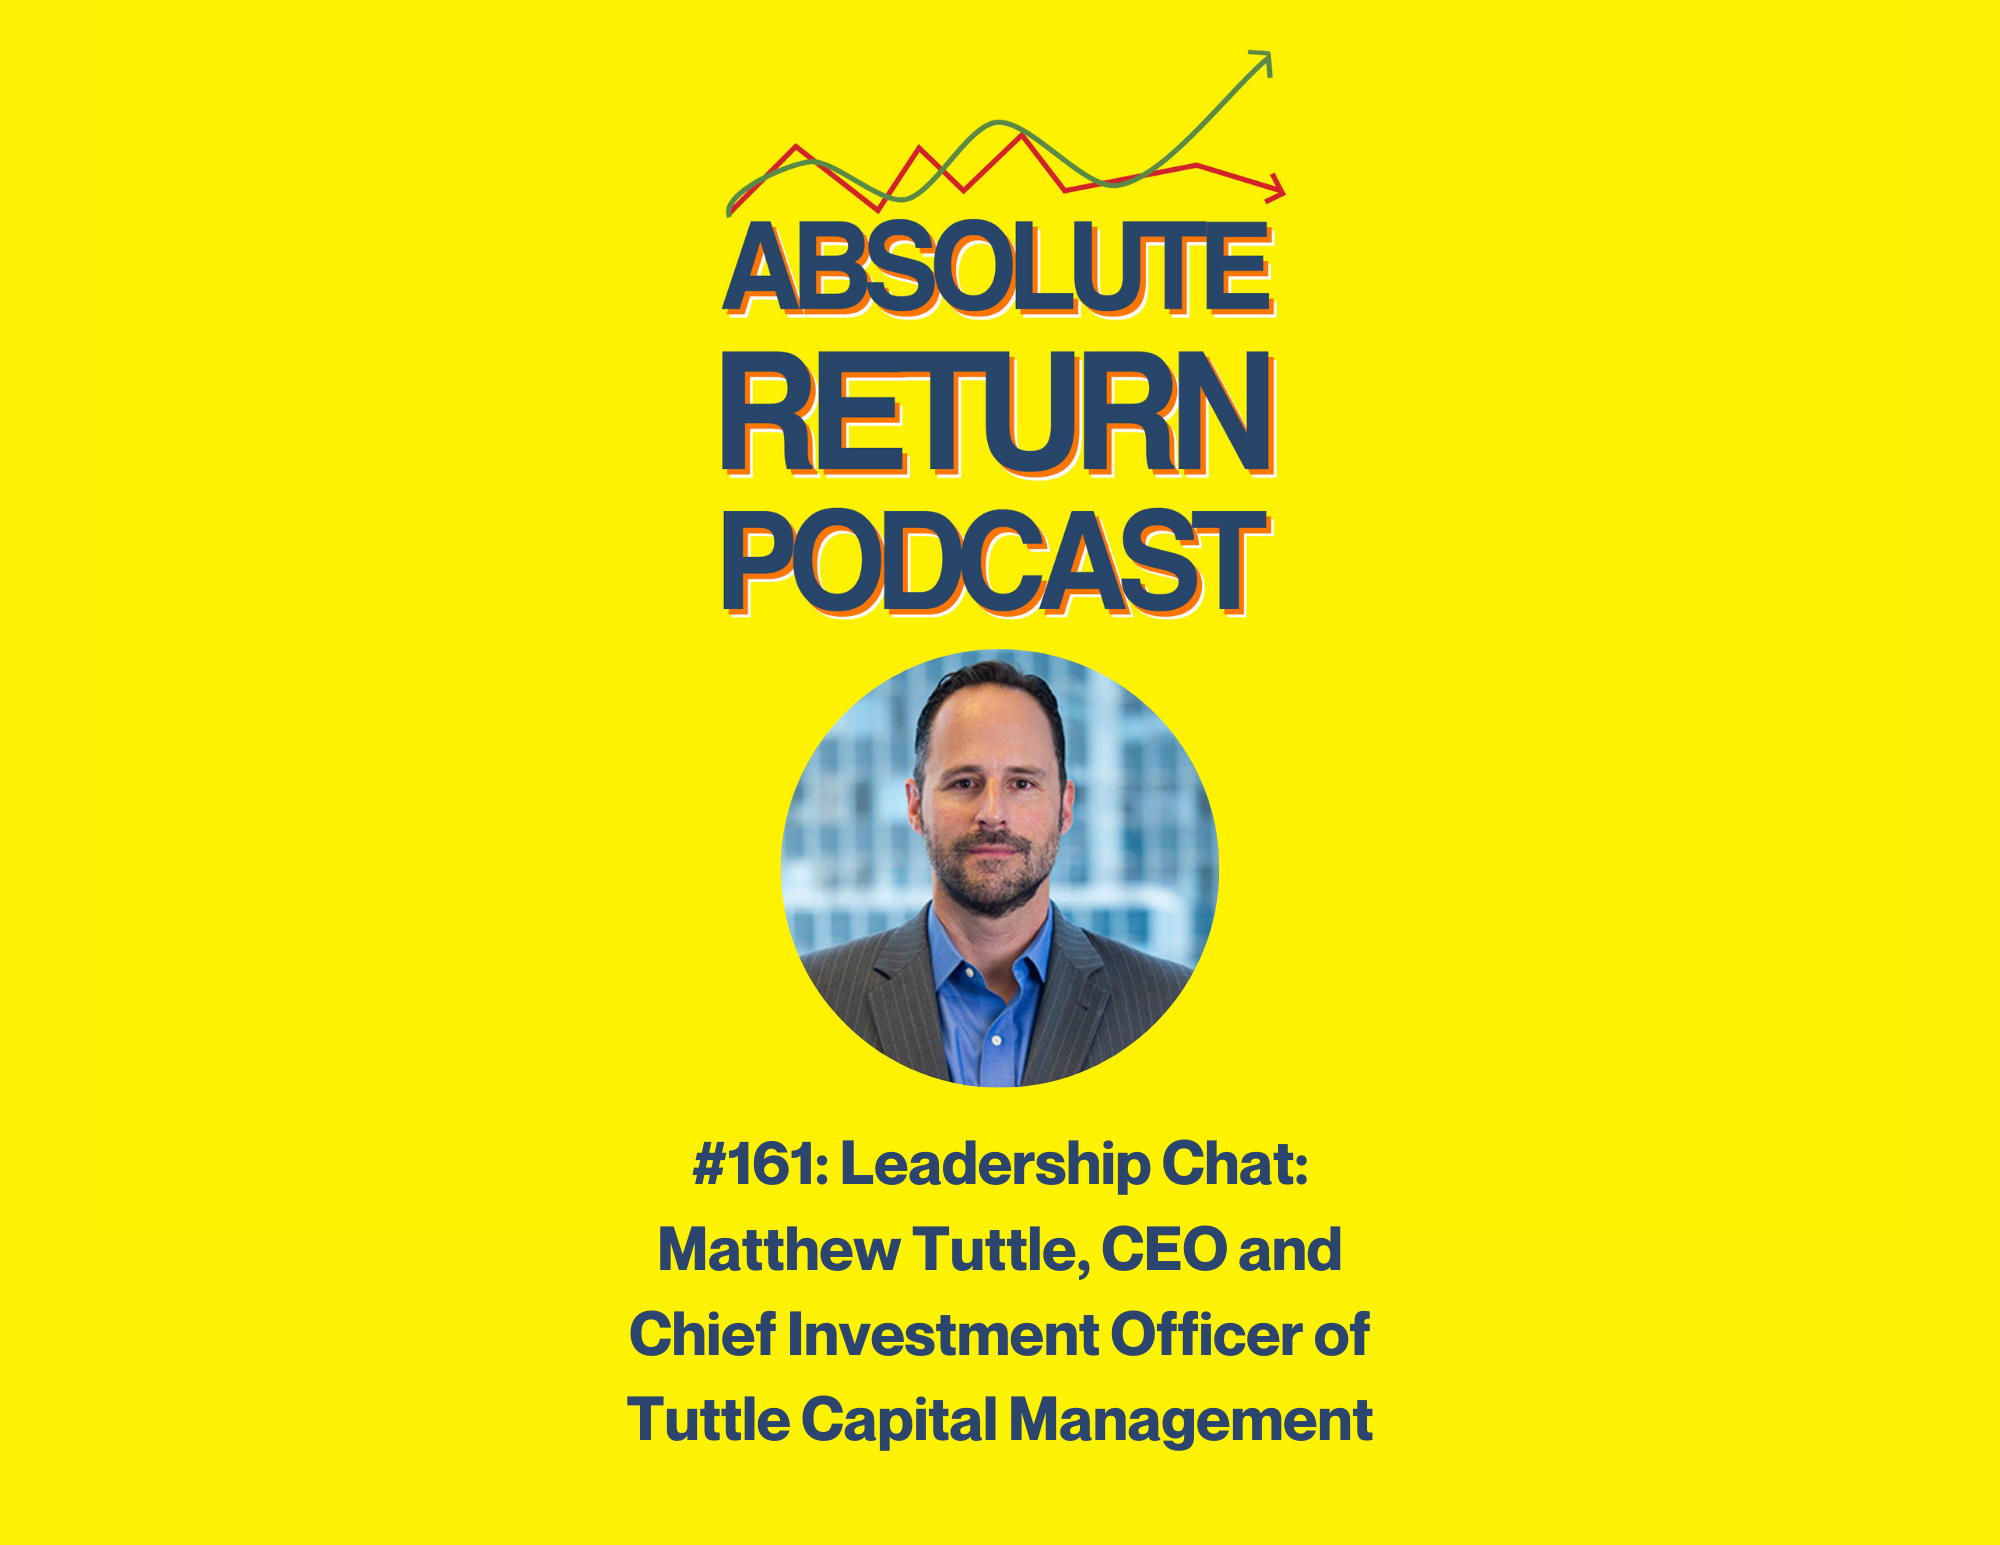 Absolute Return Podcast #161: Leadership Chat: Matthew Tuttle, CEO And Chief Investment Officer Of Tuttle Capital Management